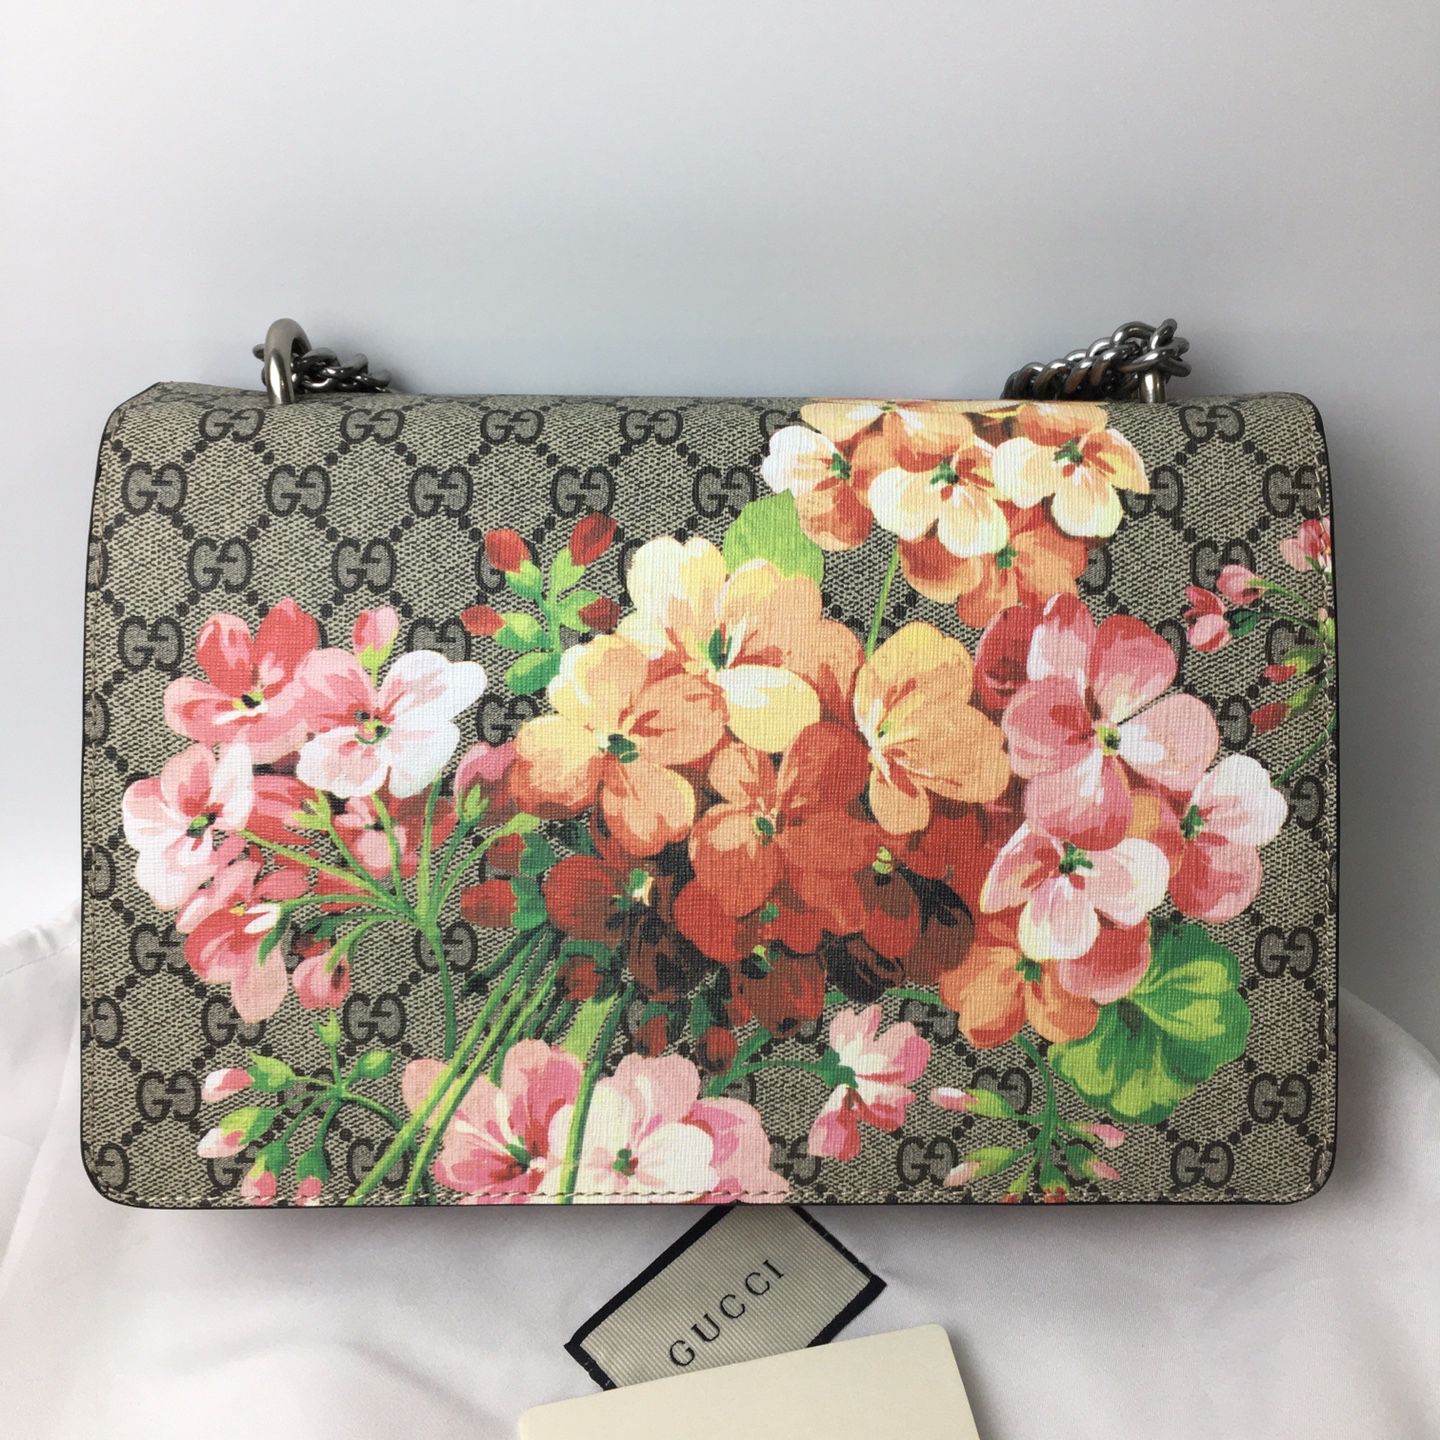 Authentic Gucci Dionysus small GG Blooms shoulder bag for Sale in